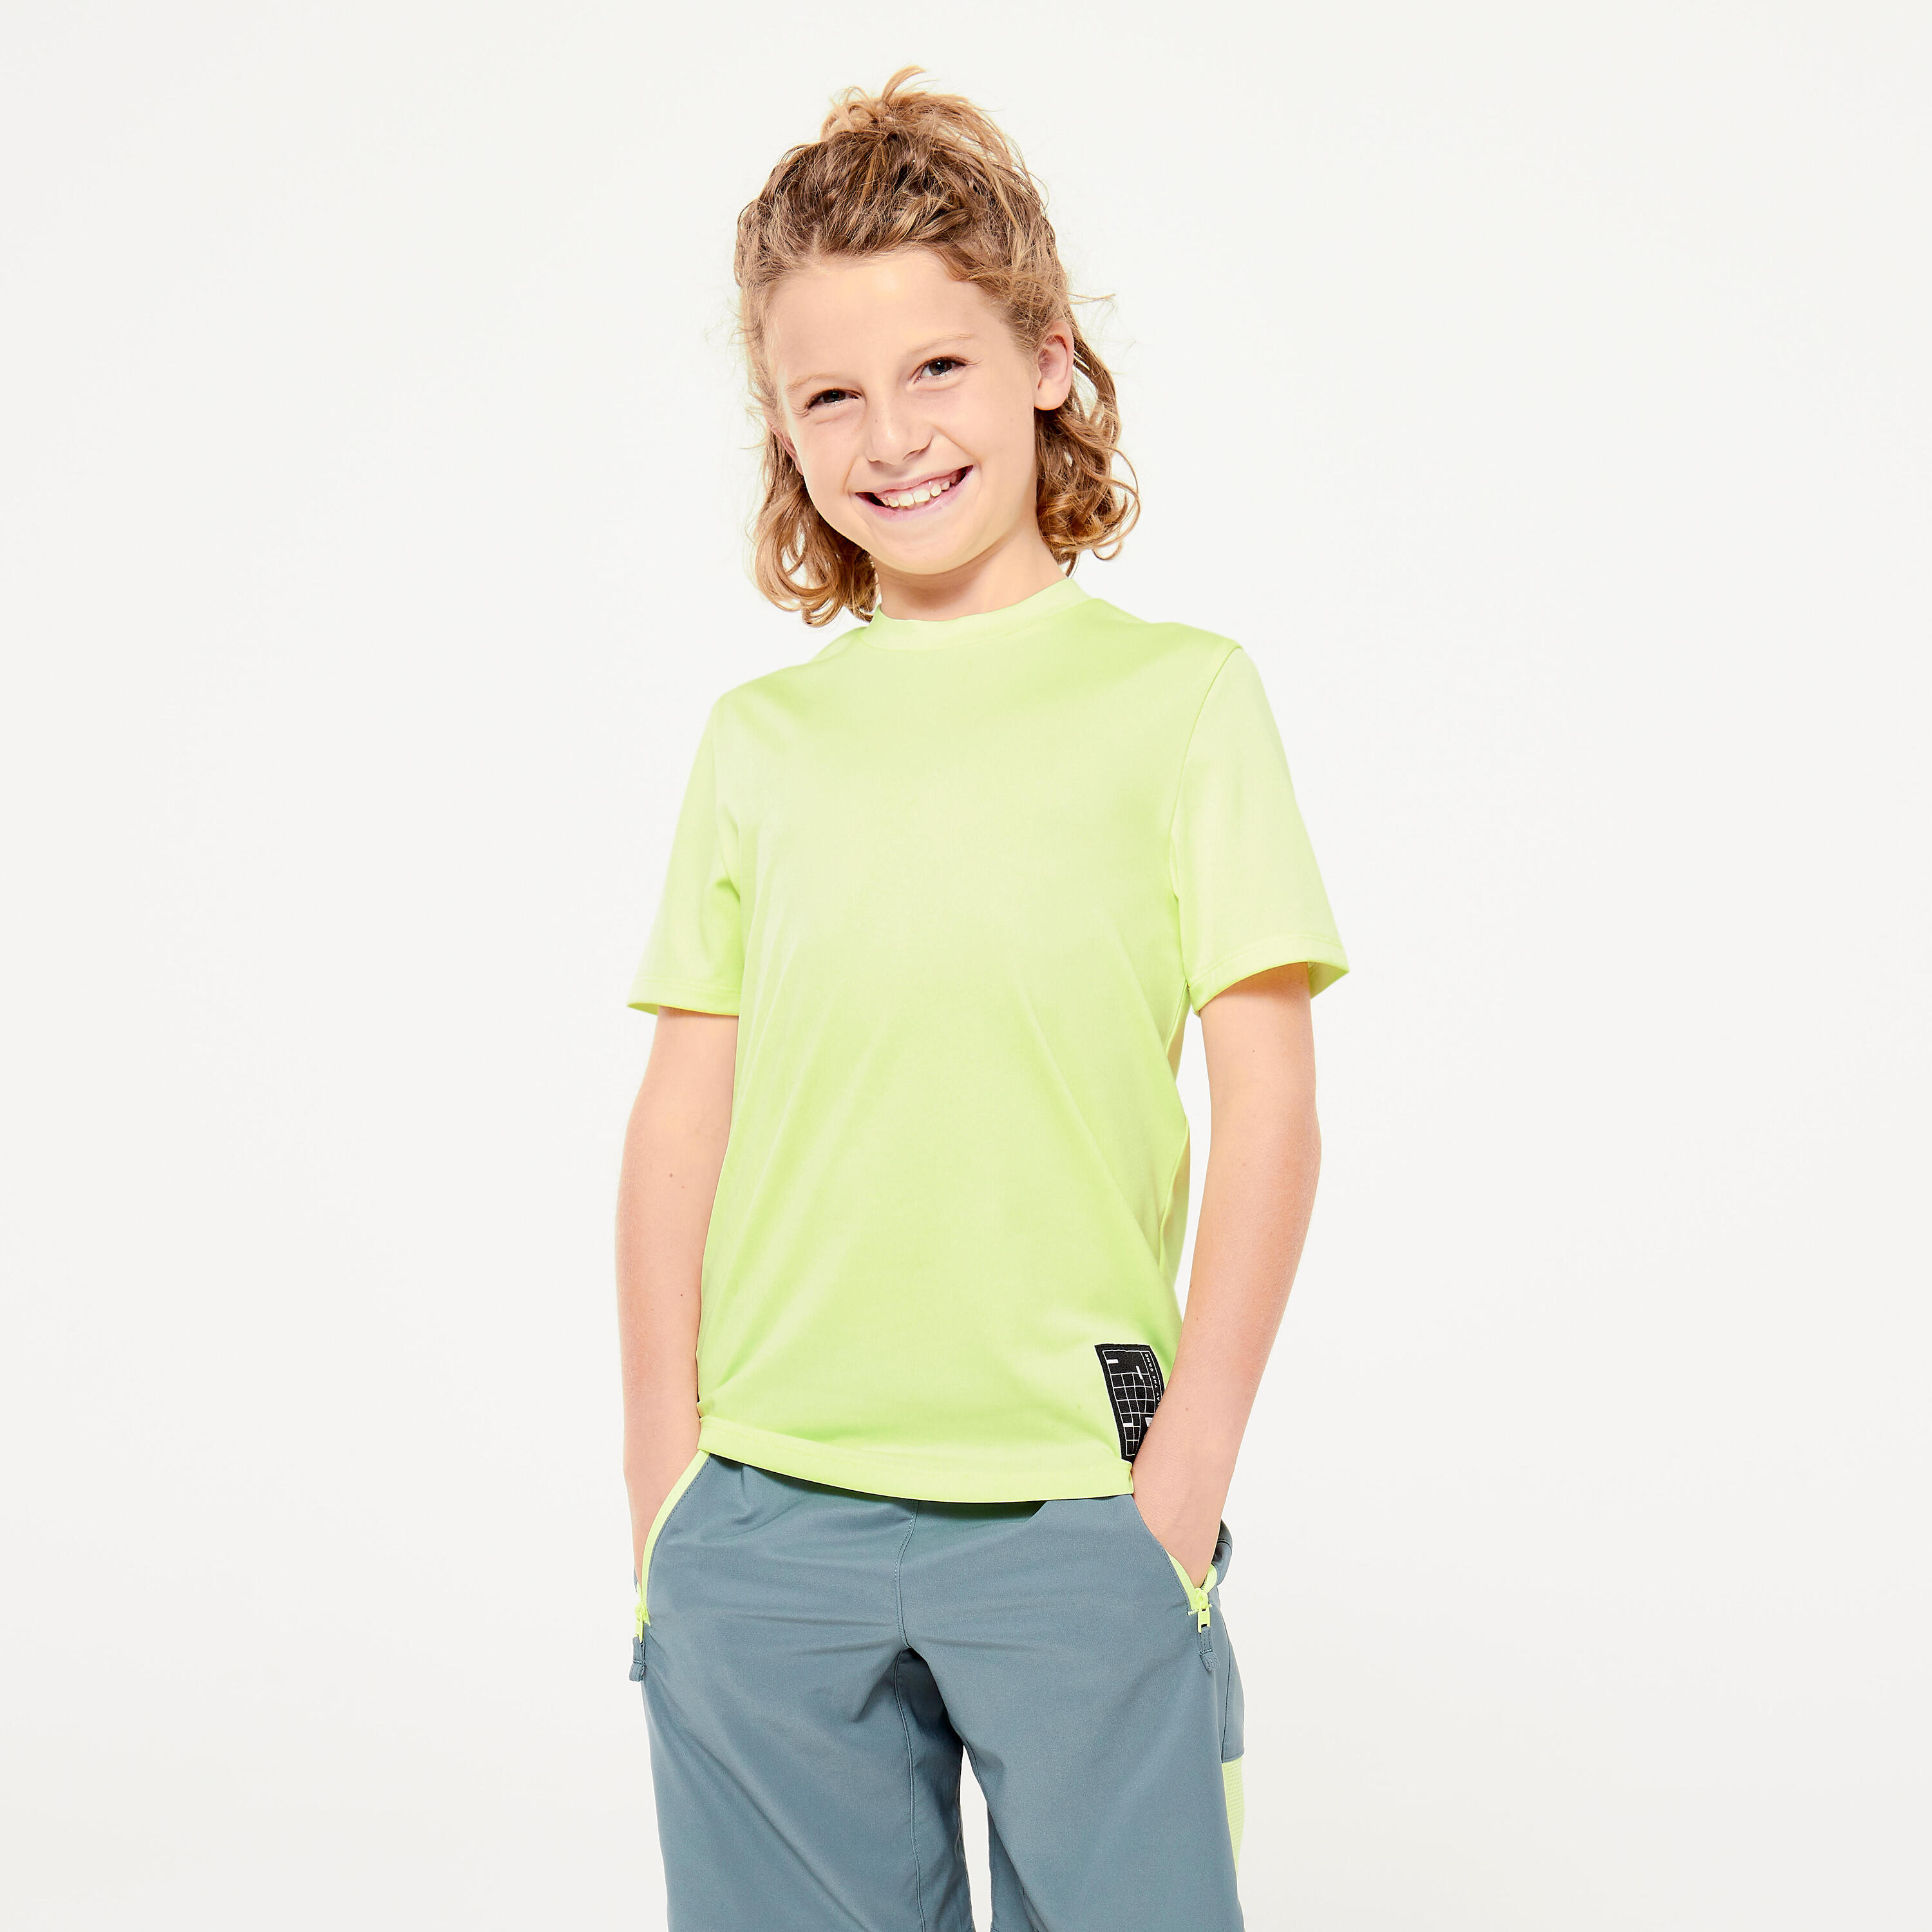 Kids' Breathable T-Shirt - Yellow 1/4